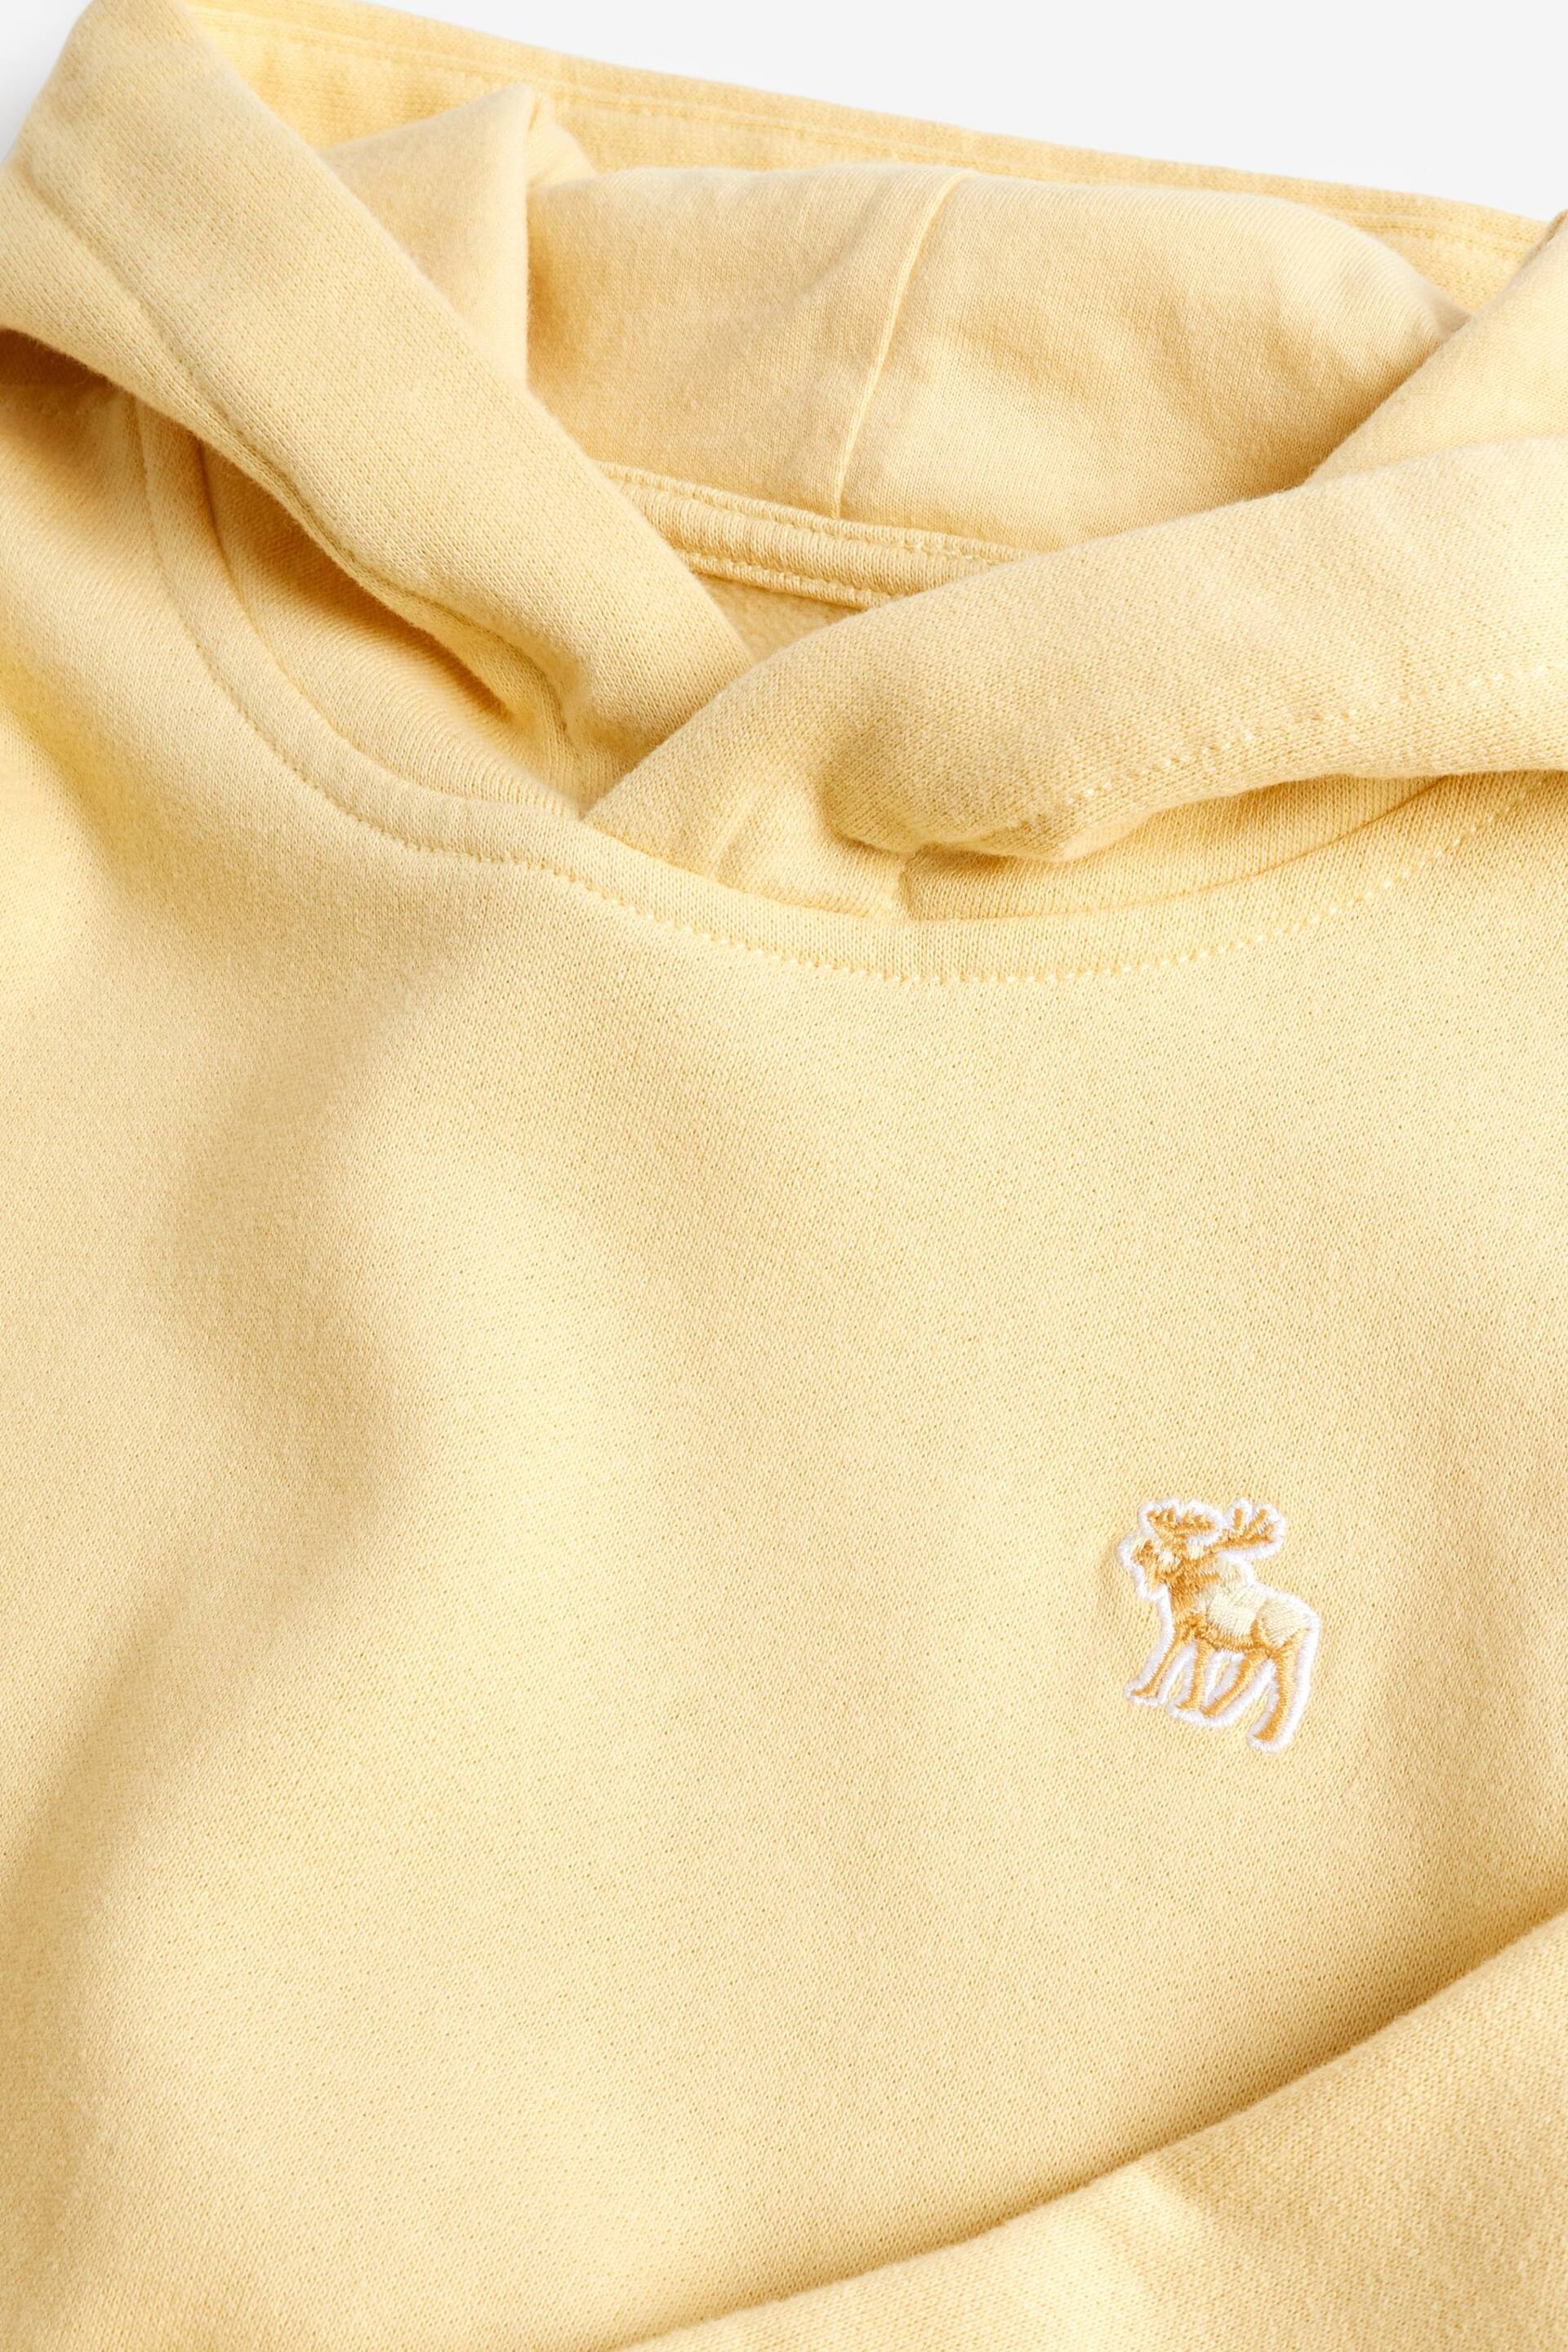 Abercrombie & Fitch Yellow Essential Relaxed Fit Hoodie - Image 3 of 3